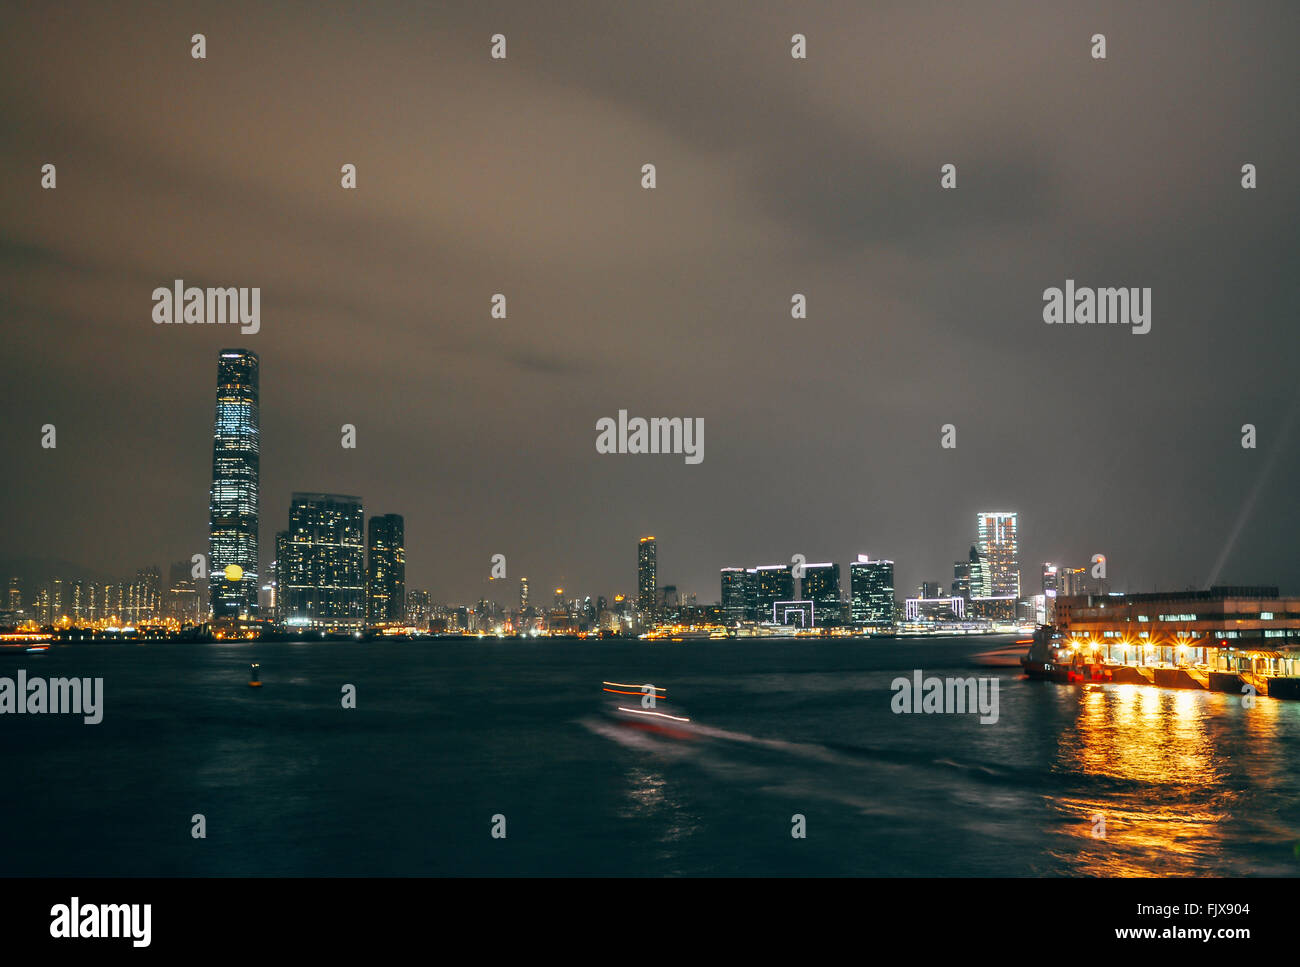 Scenic View Of Sea By Illuminated Cityscape Against Sky At Night Stock Photo